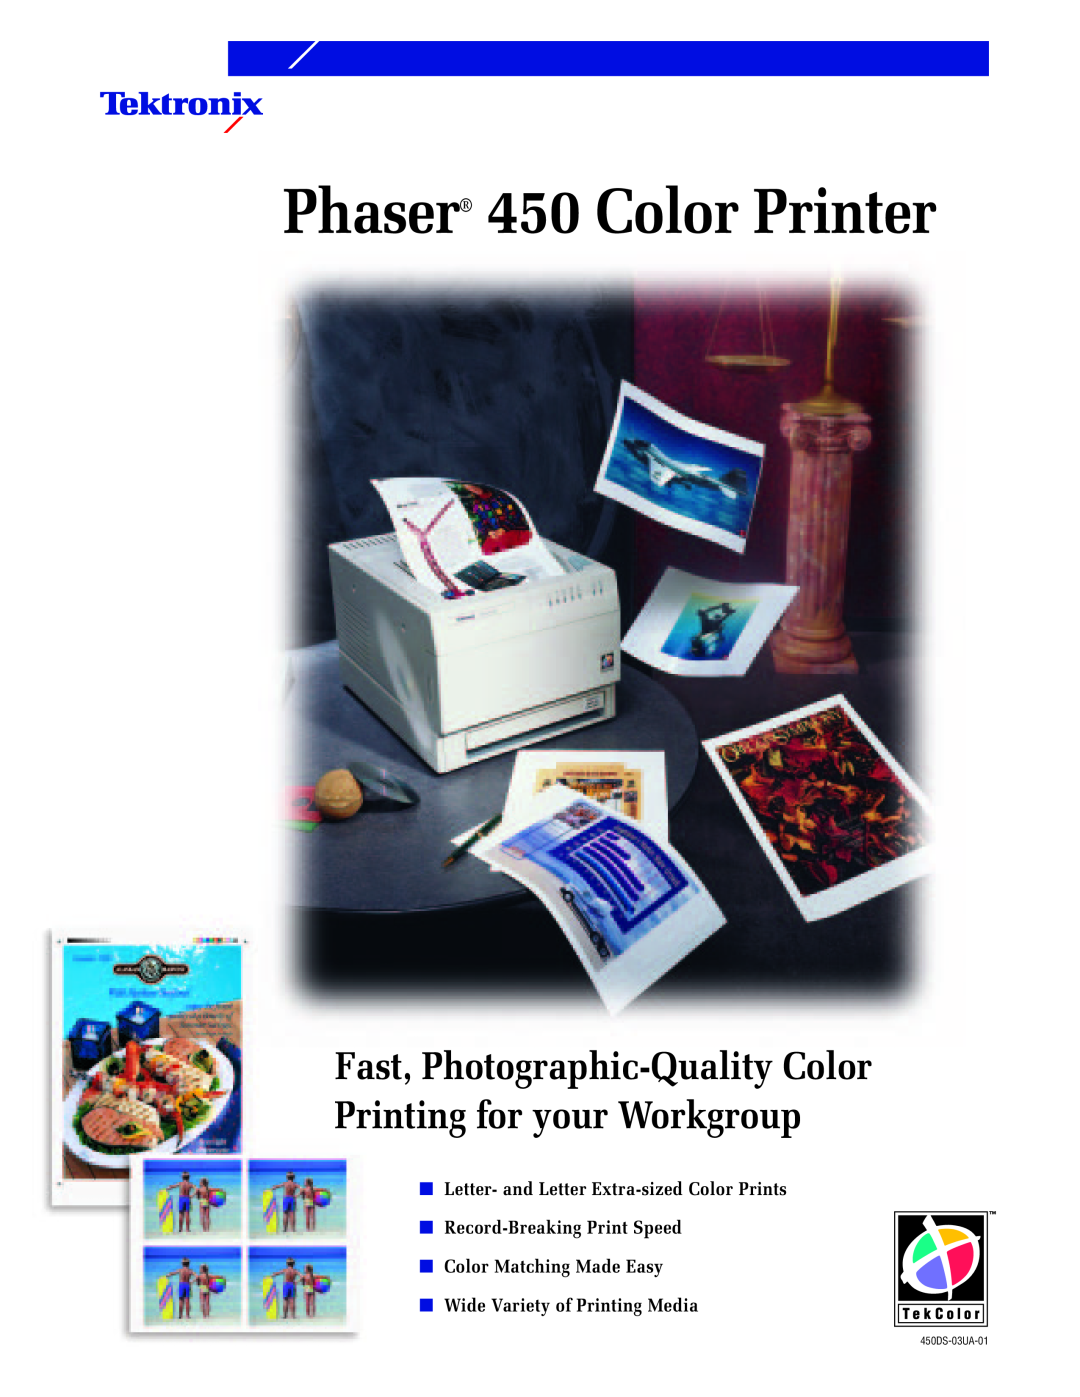 Xerox manual Phaser 450 Color Printer, Letter- and Letter Extra-sizedColor Prints, Record-BreakingPrint Speed 